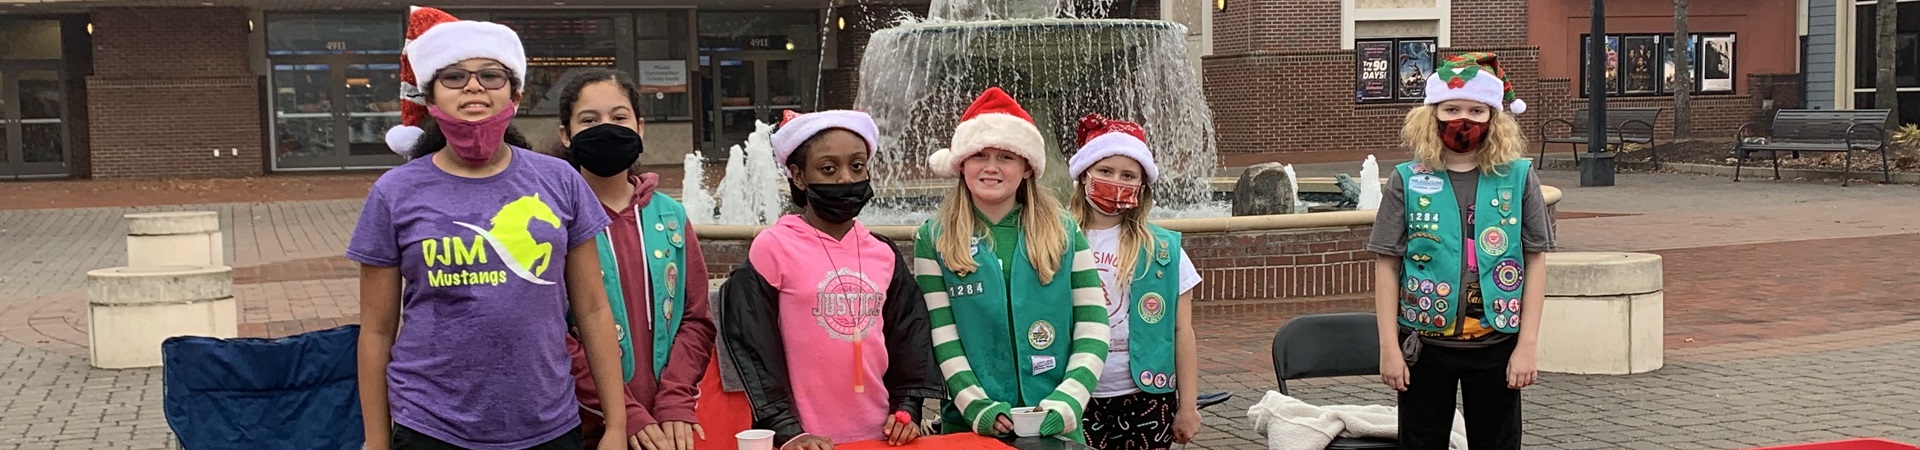  Girl Scouts collecting food for charity at the holidays in Williamsburg, Virginia 